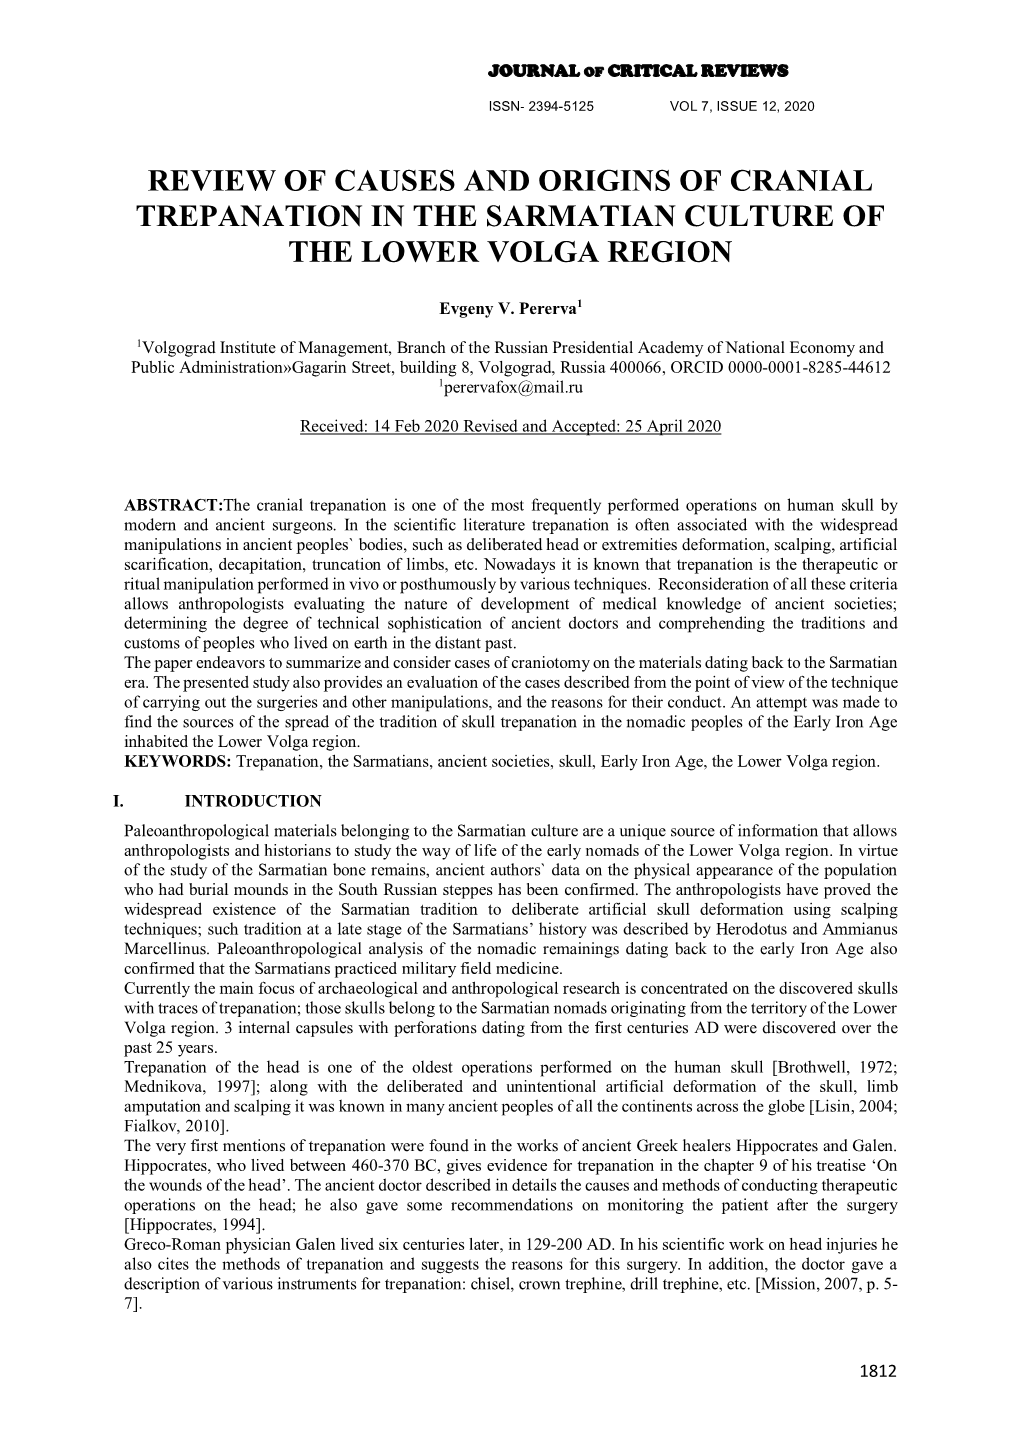 Review of Causes and Origins of Cranial Trepanation in the Sarmatian Culture of the Lower Volga Region